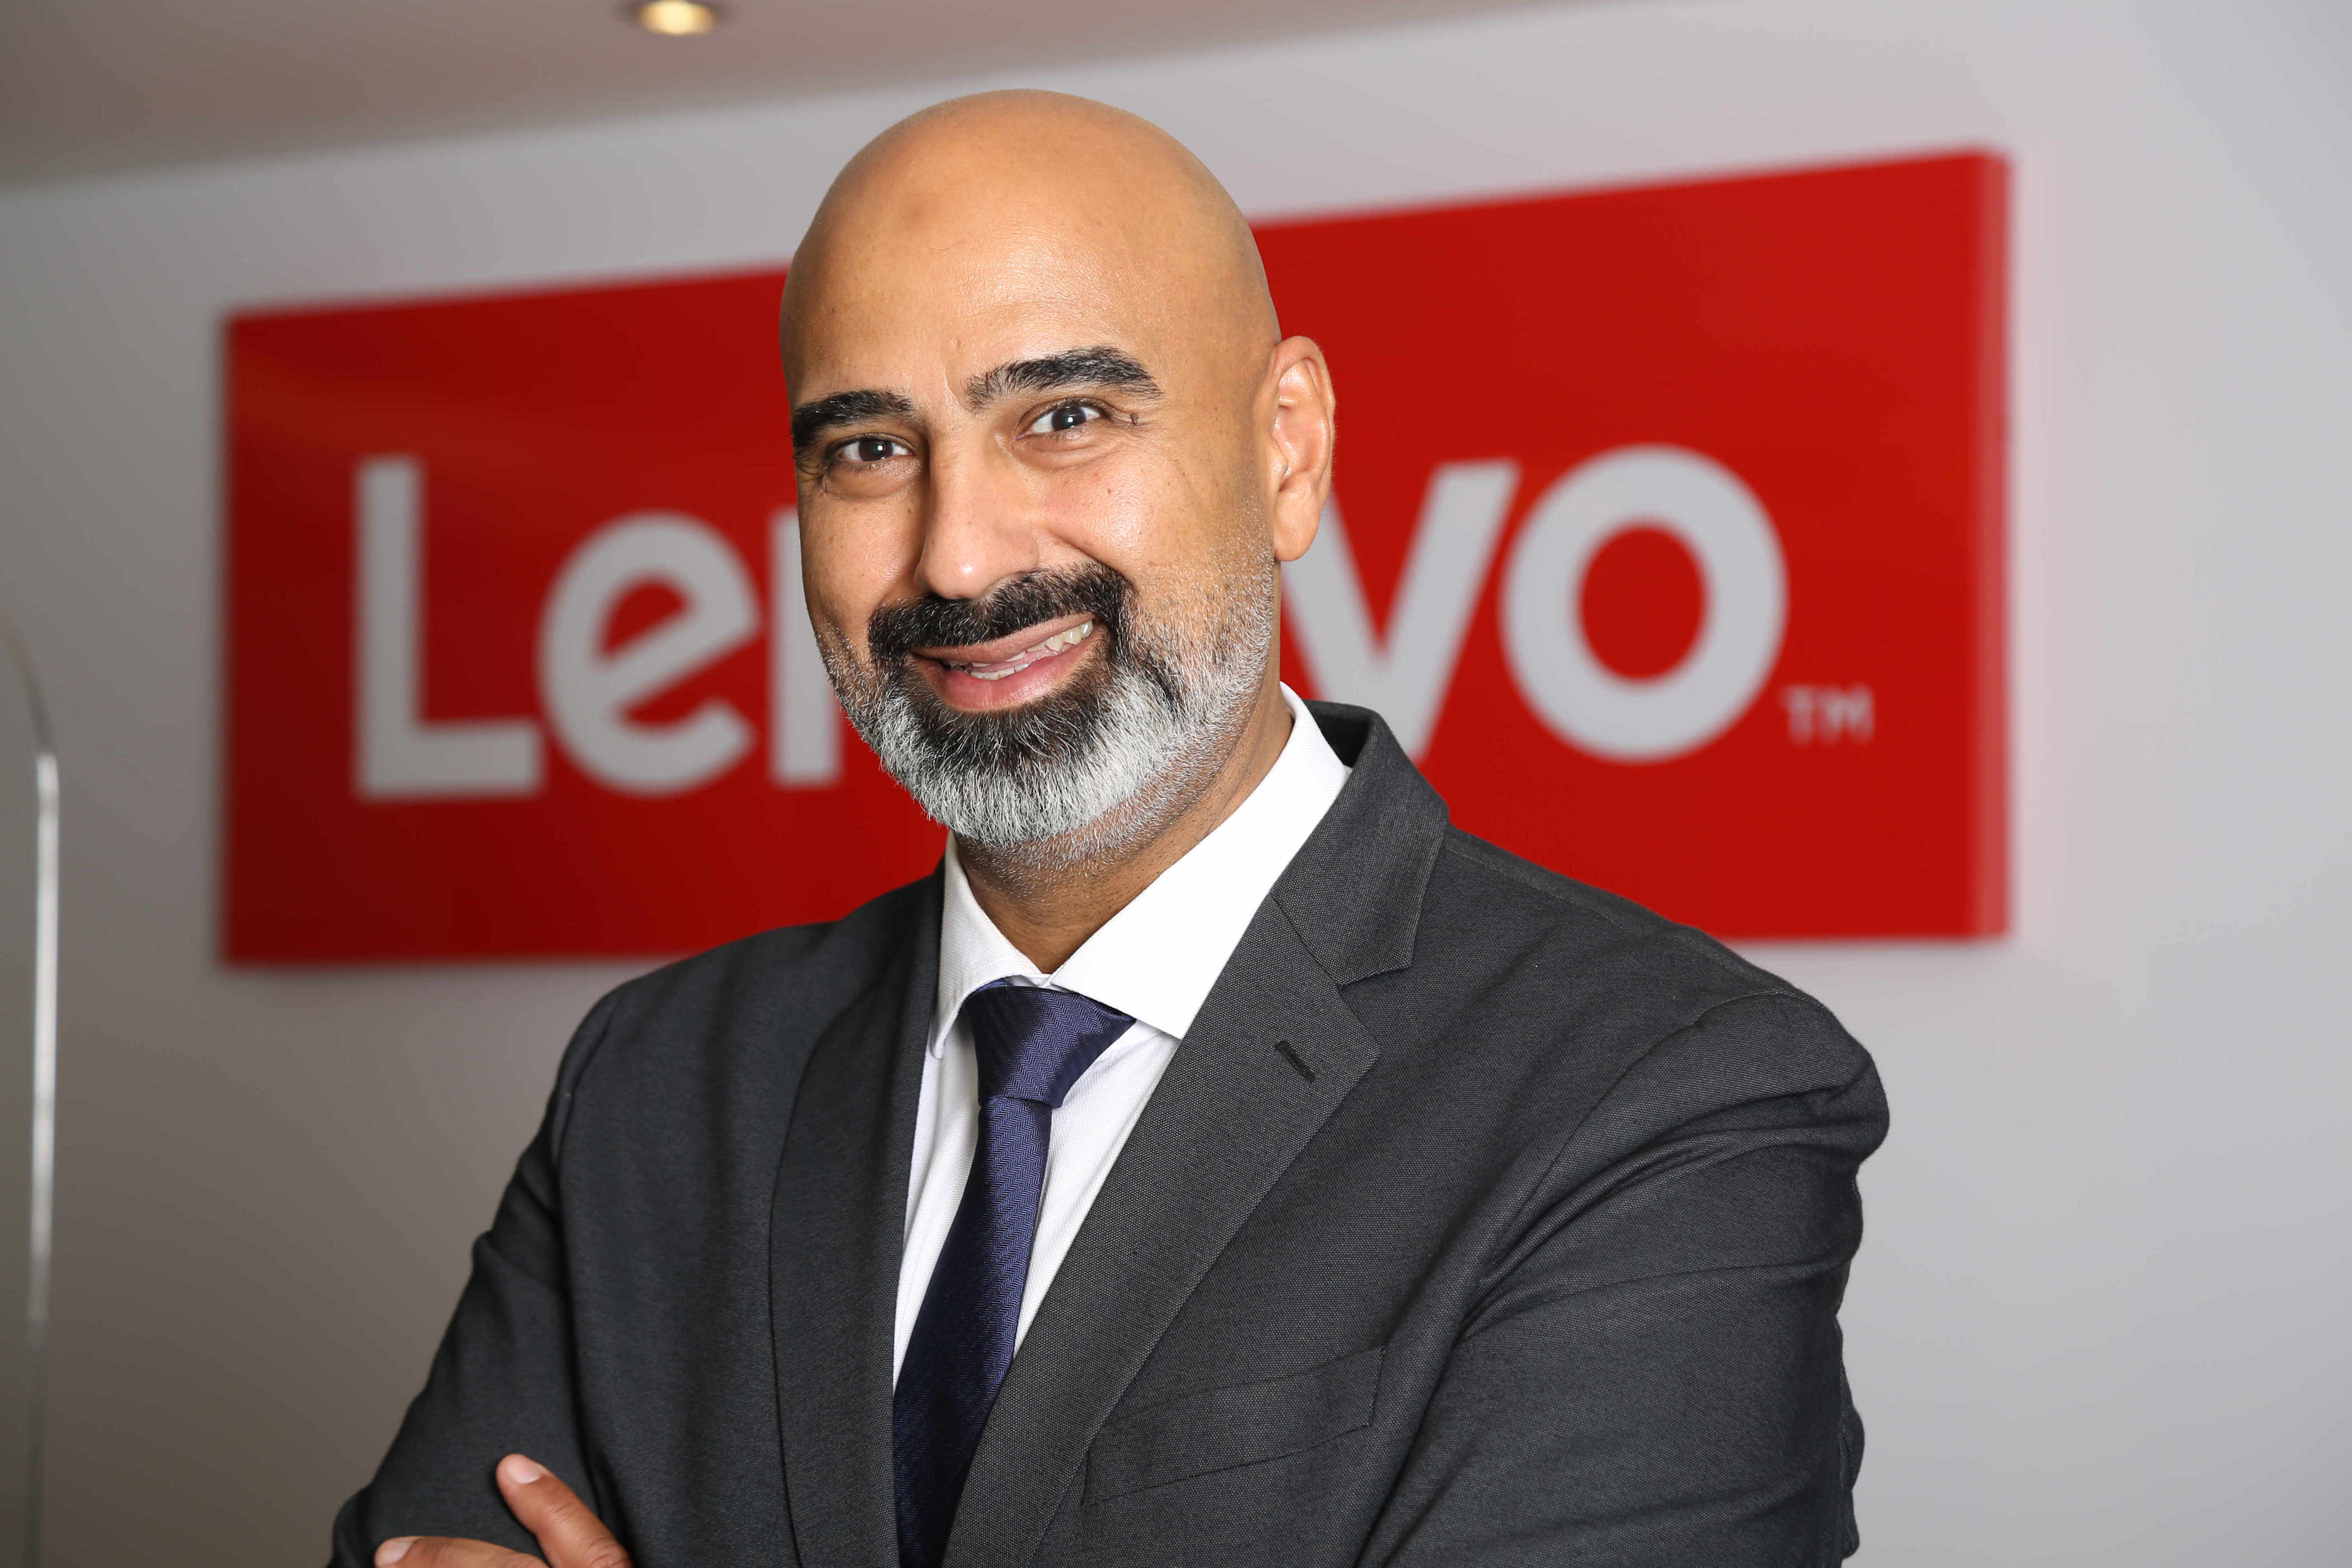 lenovo idc ebook: genai is on the rise in the middle east with large-scale adoption and year-on-year spend, new lenovo research finds